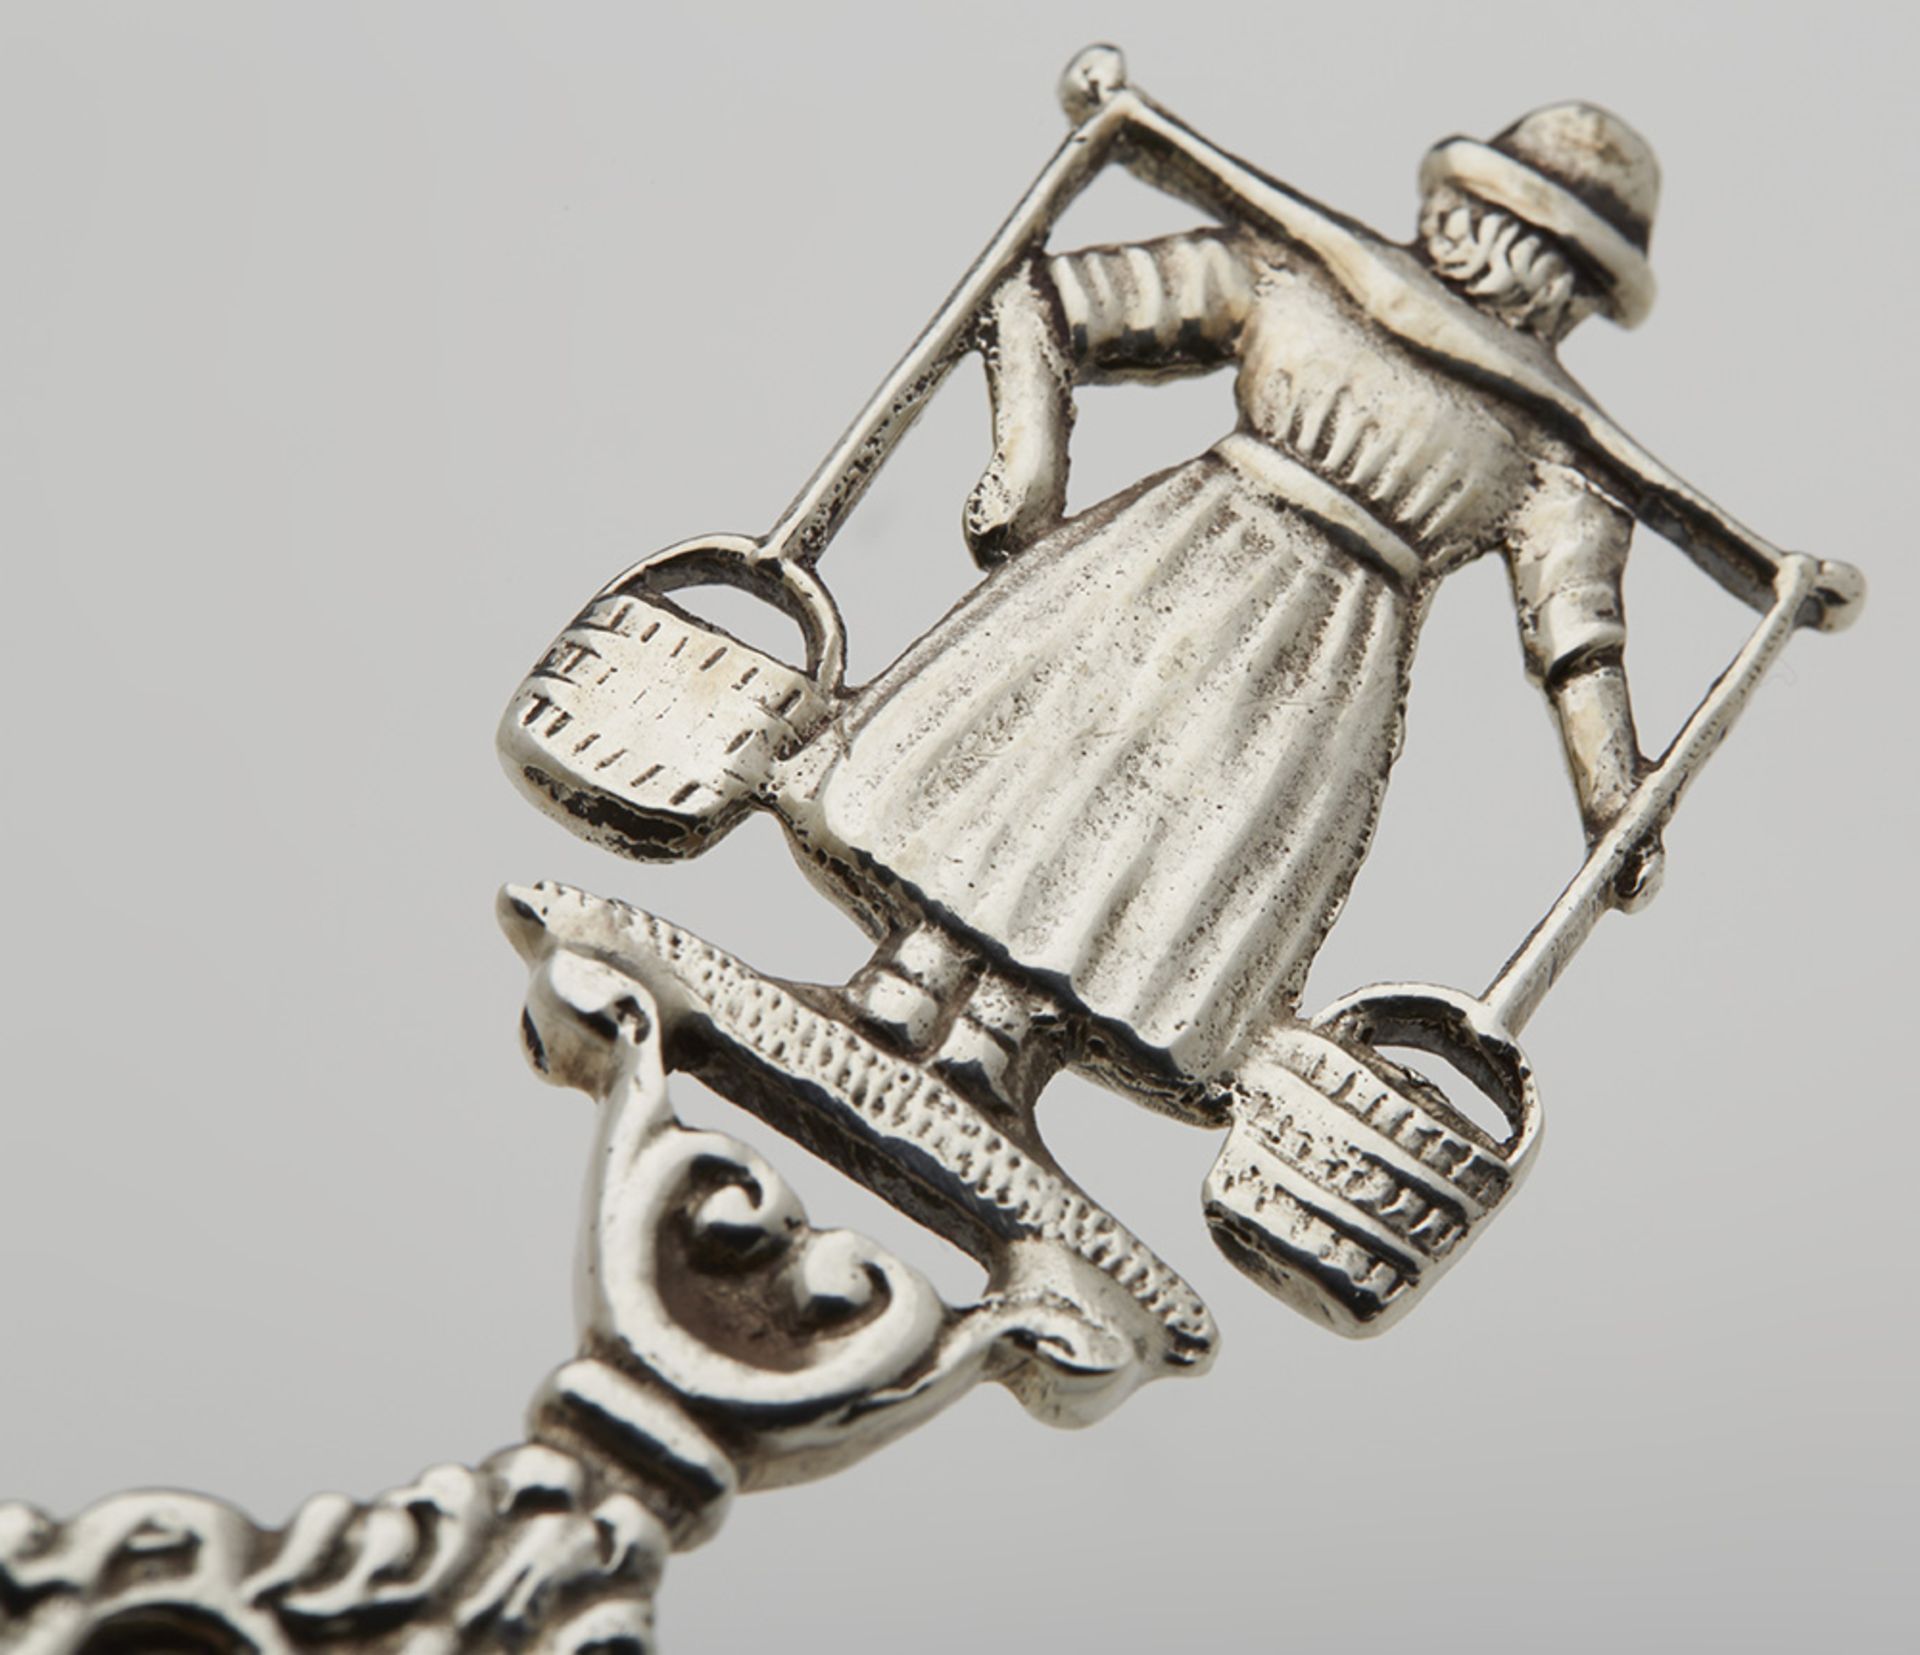 Fine Antique Dutch Silver Happy Farmers Presentation Spoon With Figural Bowl 19Th C. - Image 2 of 7